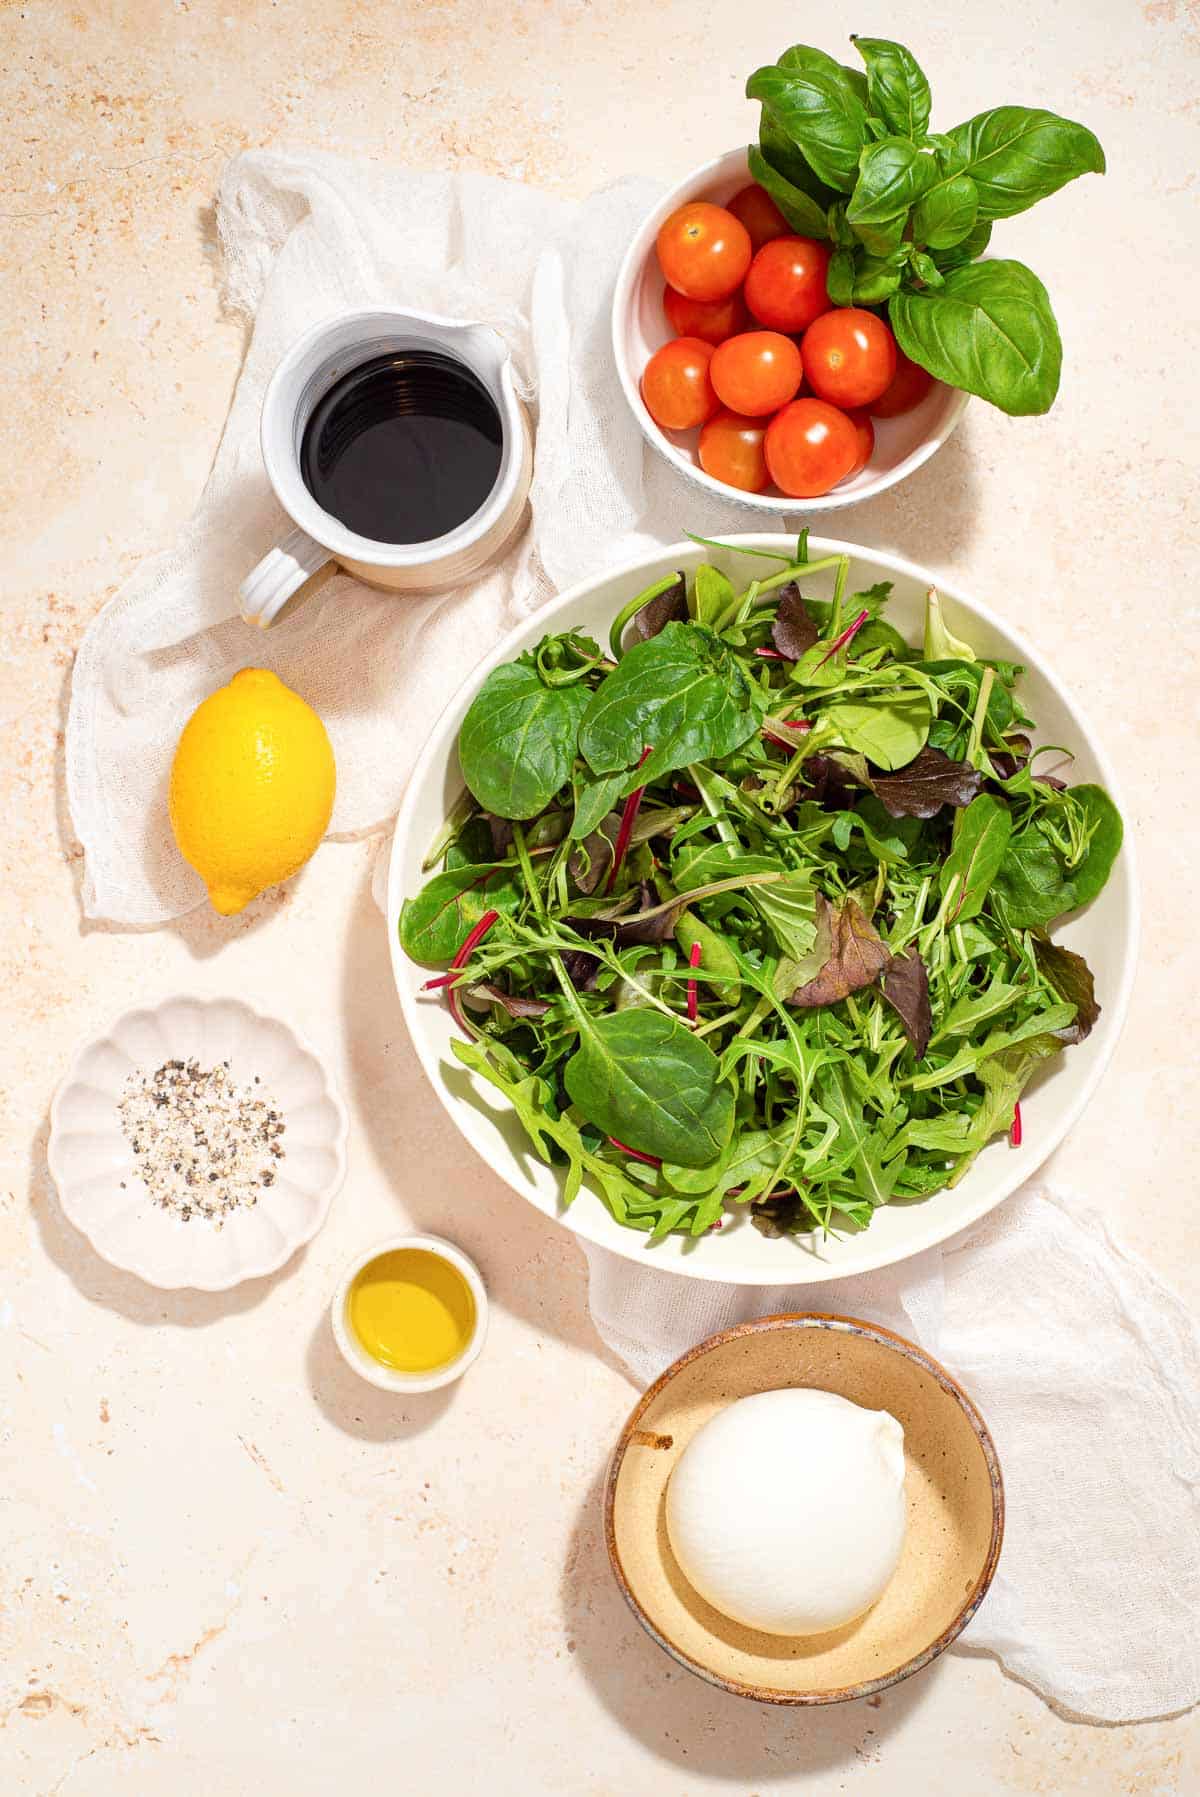 The ingredients for a burrata caprese salad are in a bowl on a table.